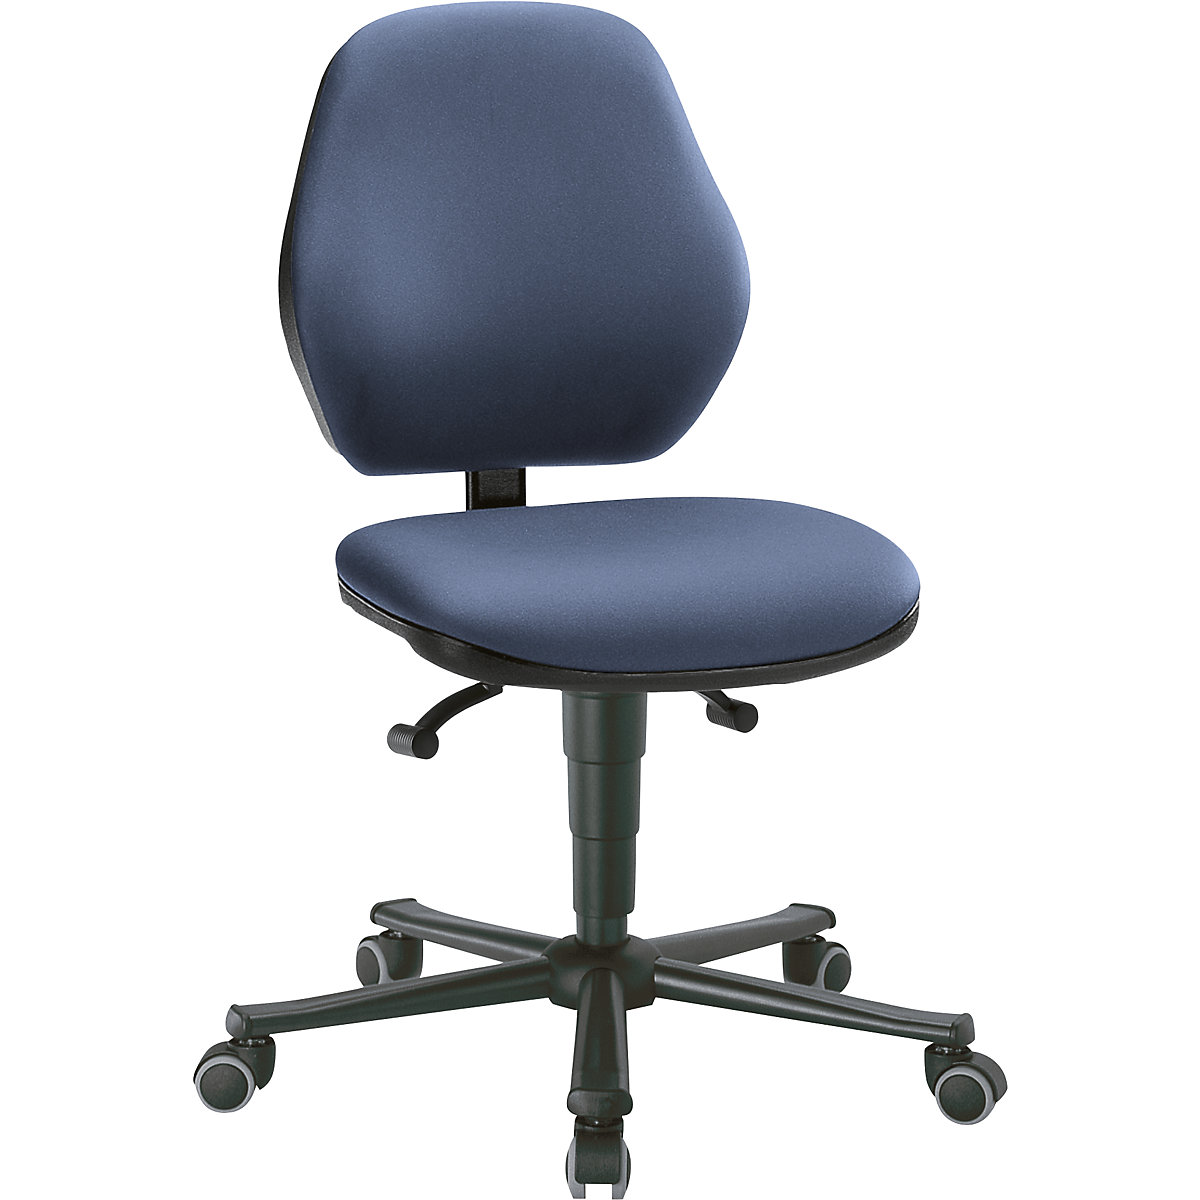 Industrial chair – bimos, permanent contact, with castors, vinyl covering-2